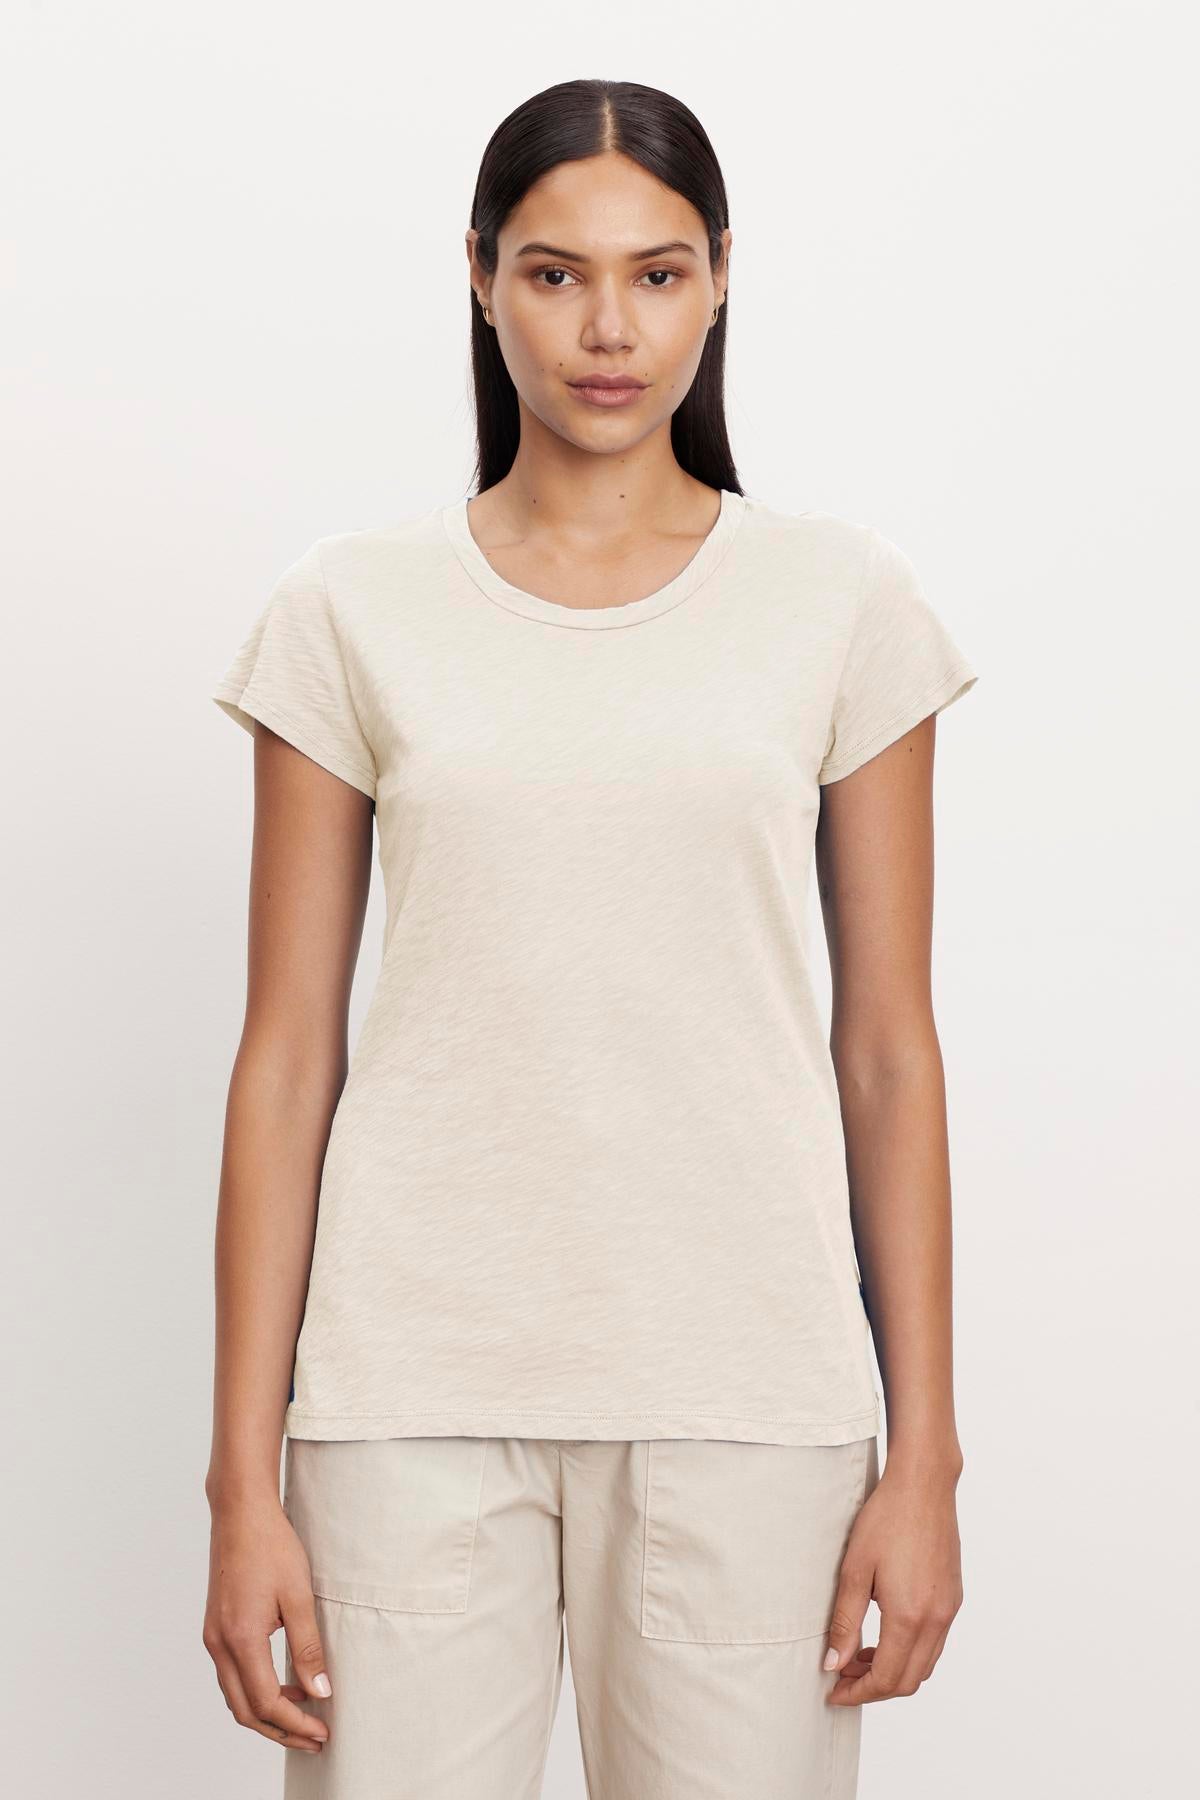 A person with long, straight hair stands facing the camera, wearing a short-sleeve, beige ODELIA TEE by Velvet by Graham & Spencer and light-colored pants against a plain background.-37249868431553